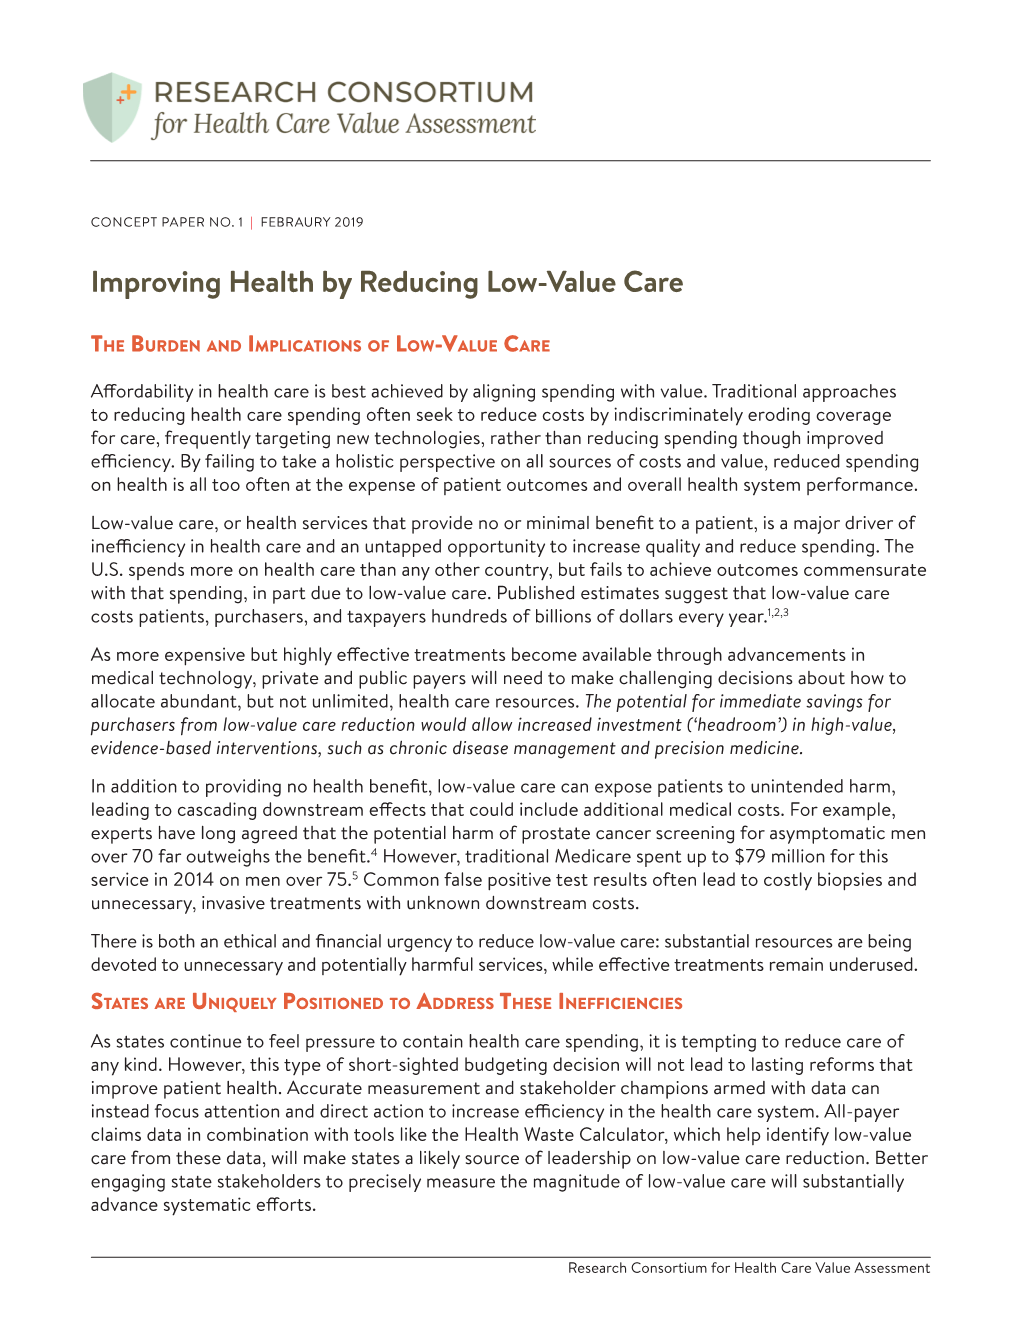 Improving Health by Reducing Low-Value Care